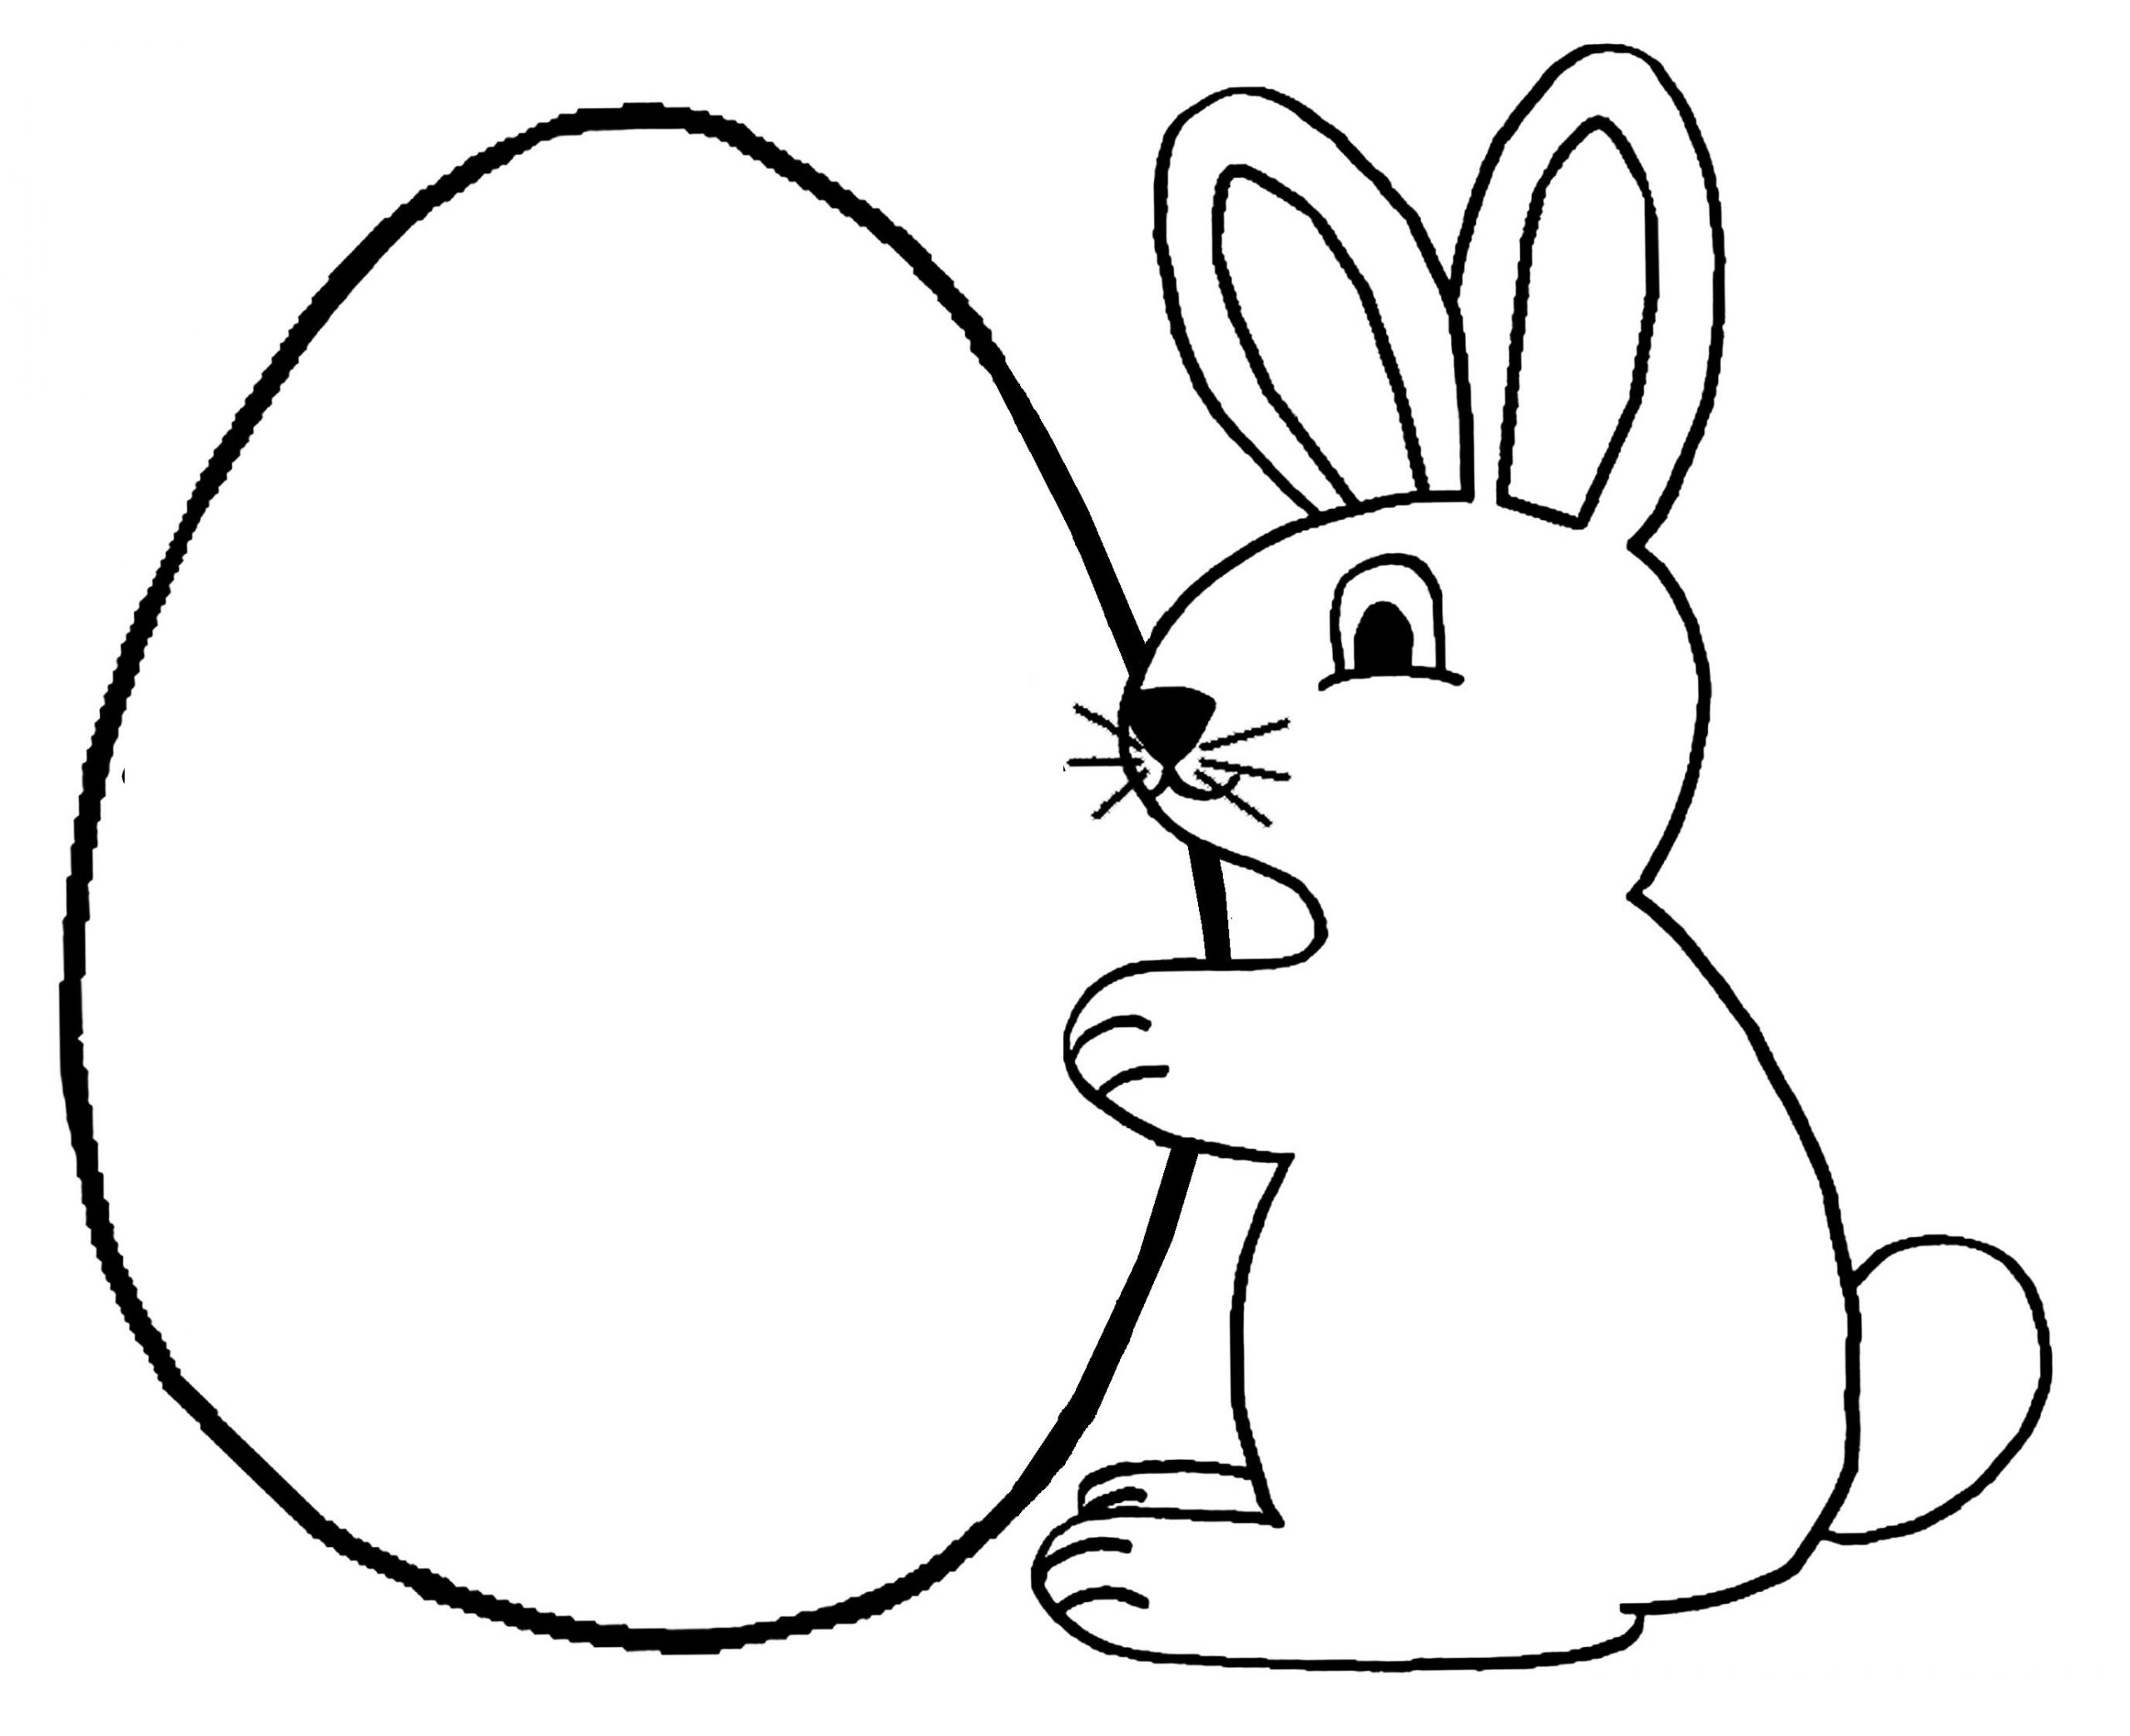 Lapin Coloriage Gallery concernant Coloriage Lapin